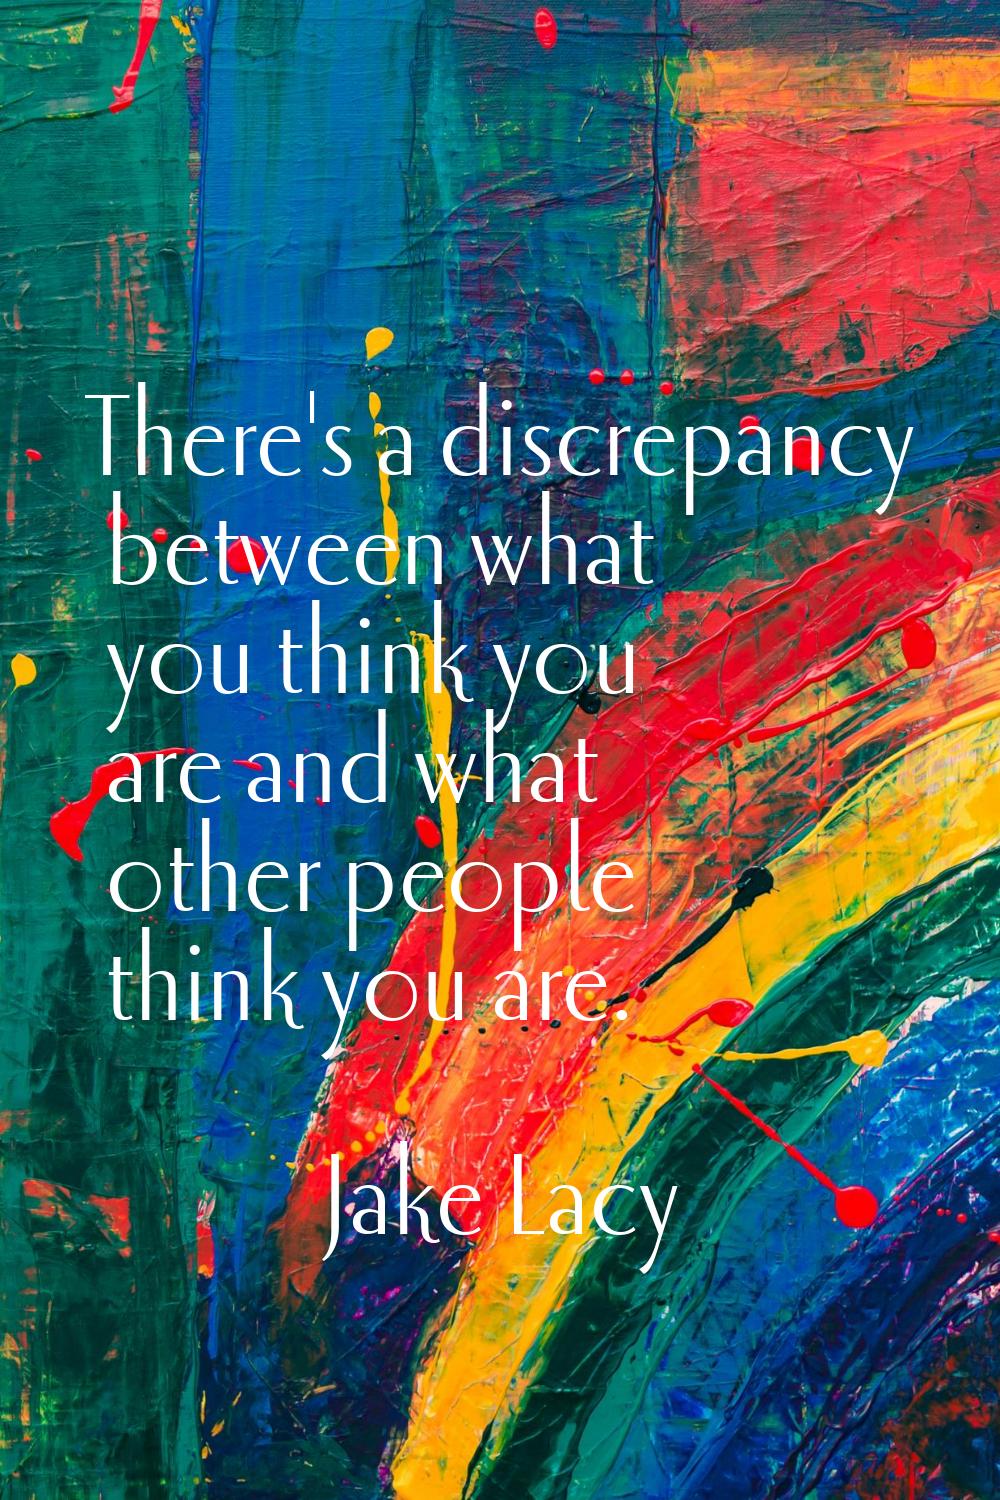 There's a discrepancy between what you think you are and what other people think you are.